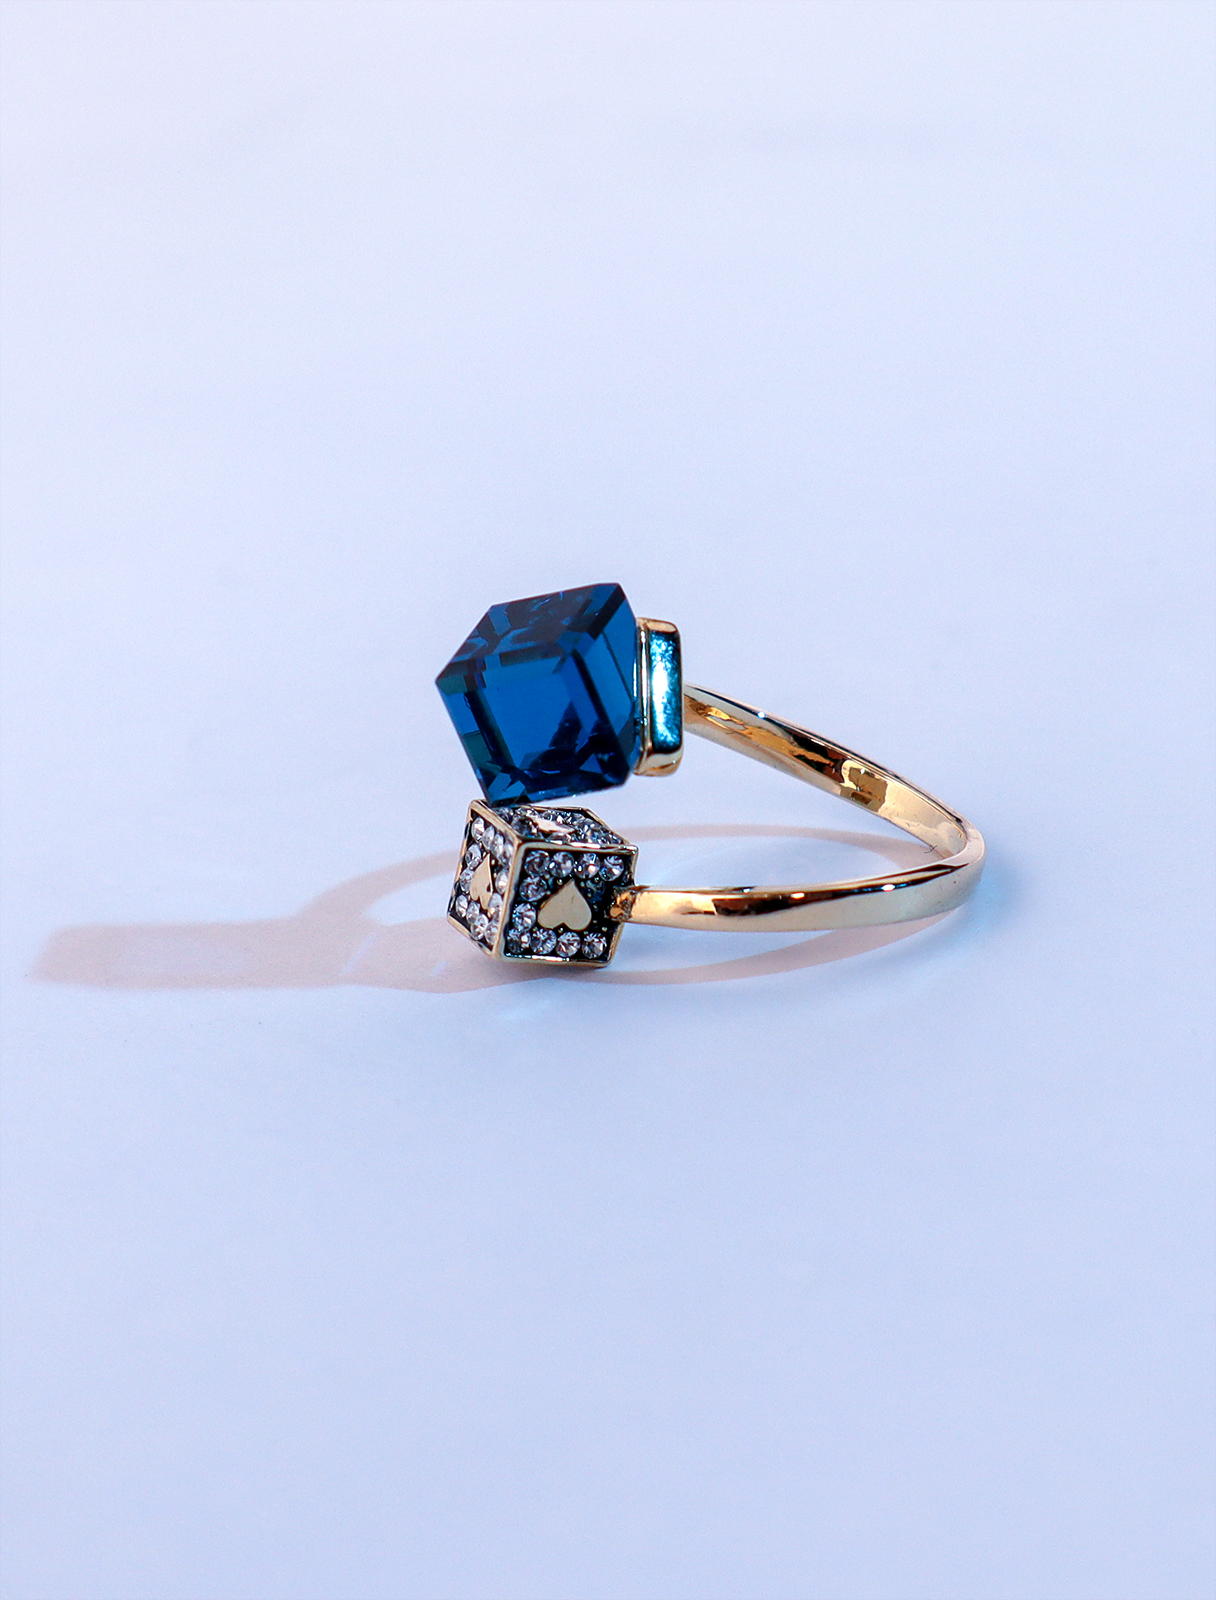 Cube design ring with sapphire blue stone